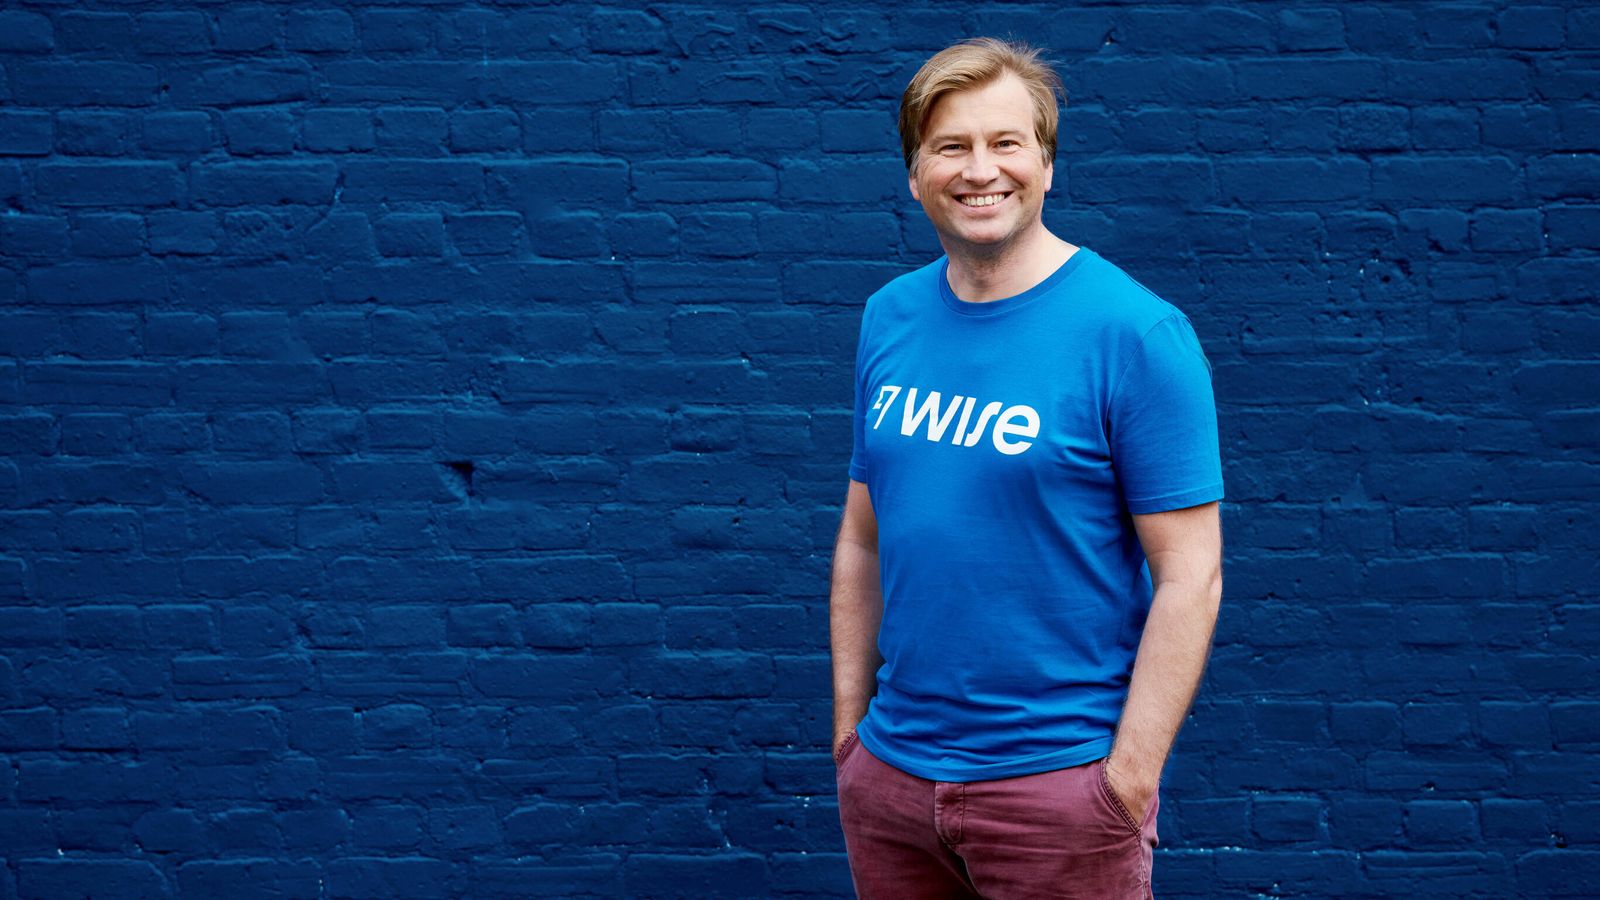 Fintech Wise’s CEO and early investors to retain control in £5bn London float